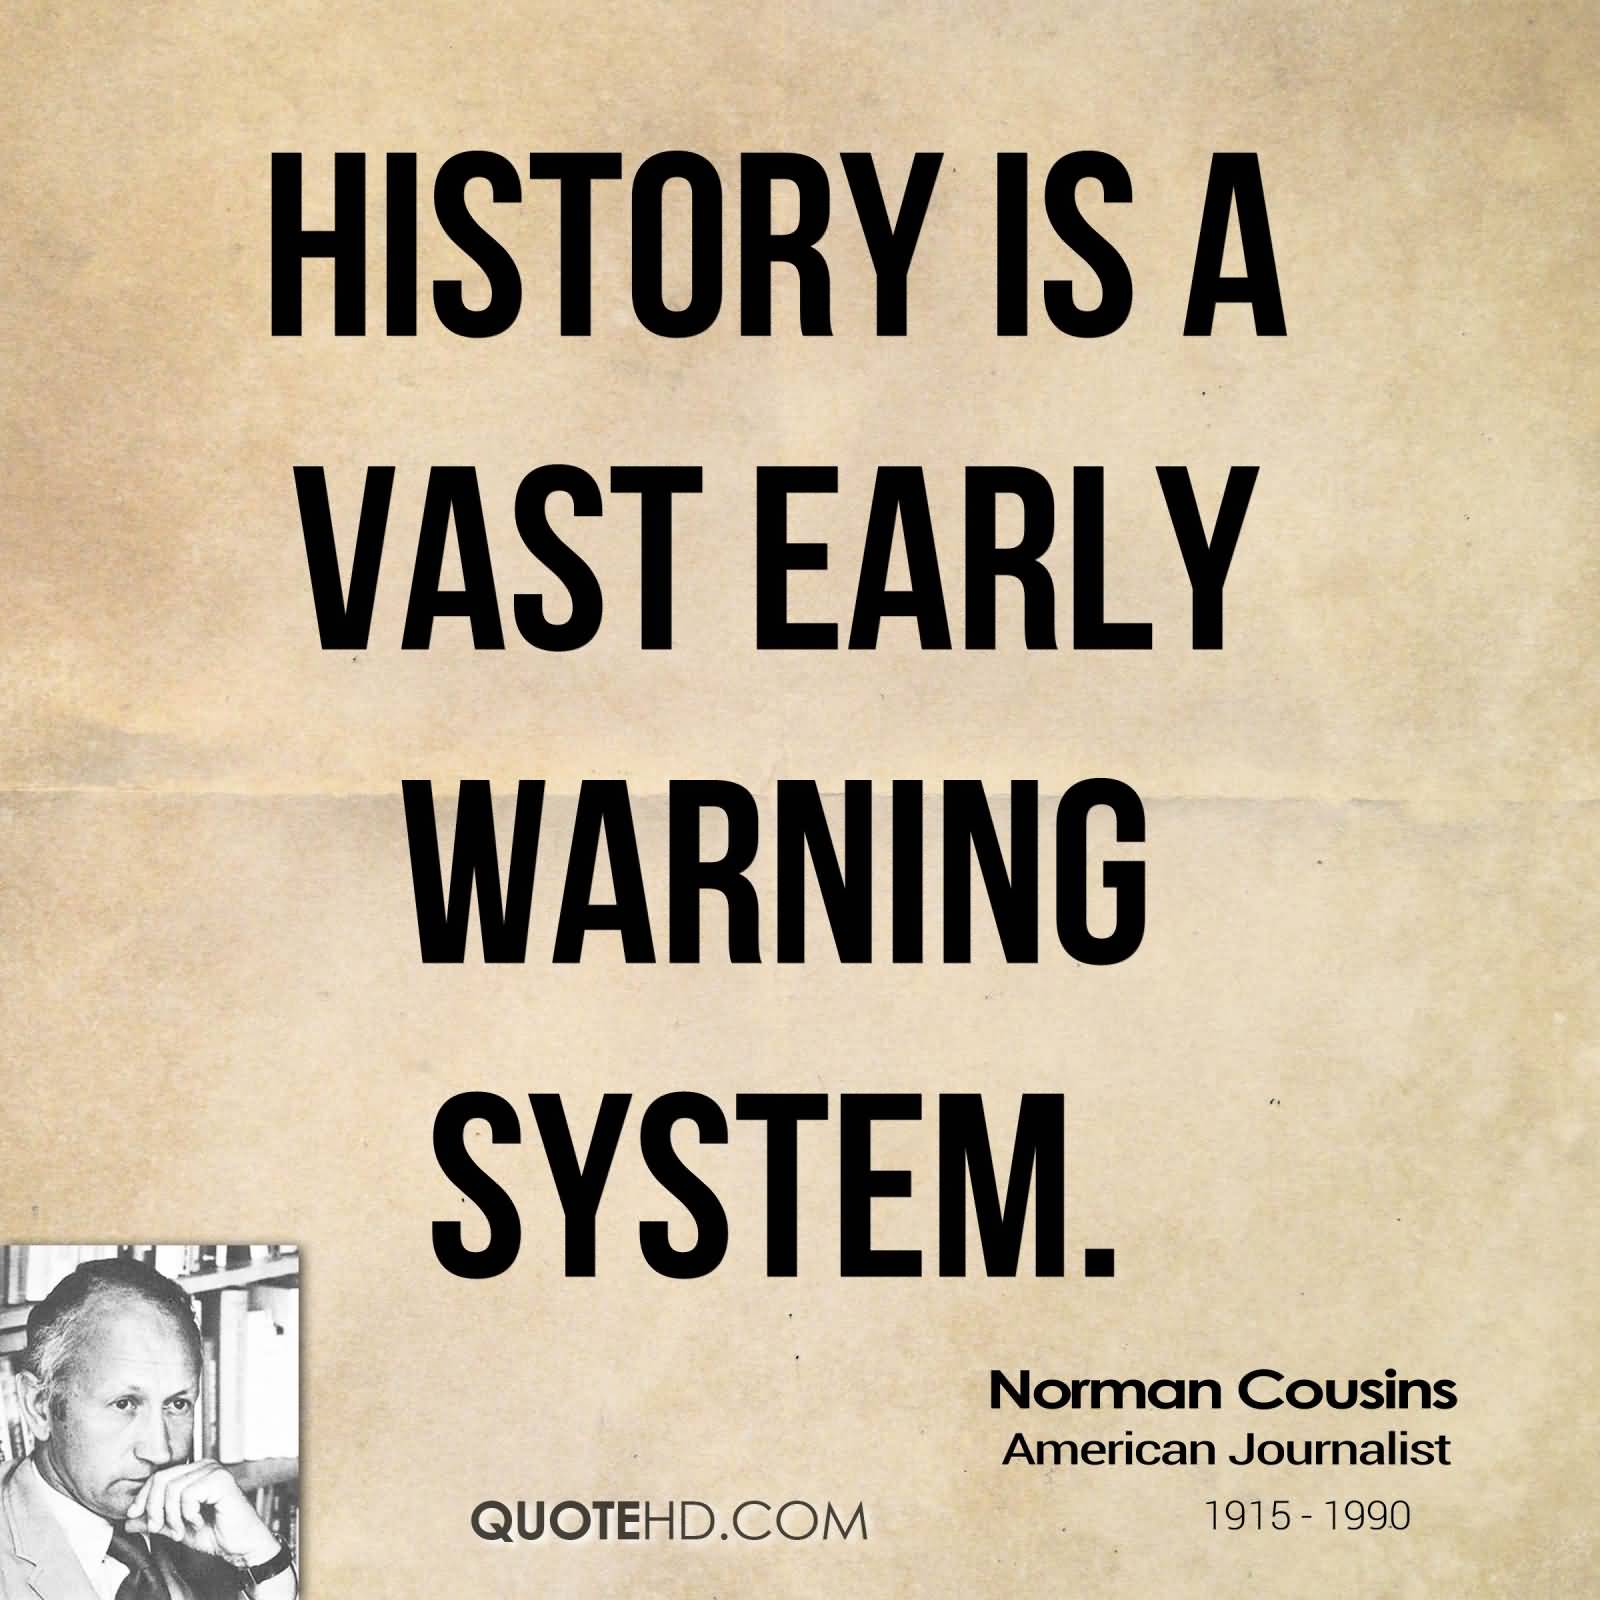 History is a vast early warning system. Norman Cousins